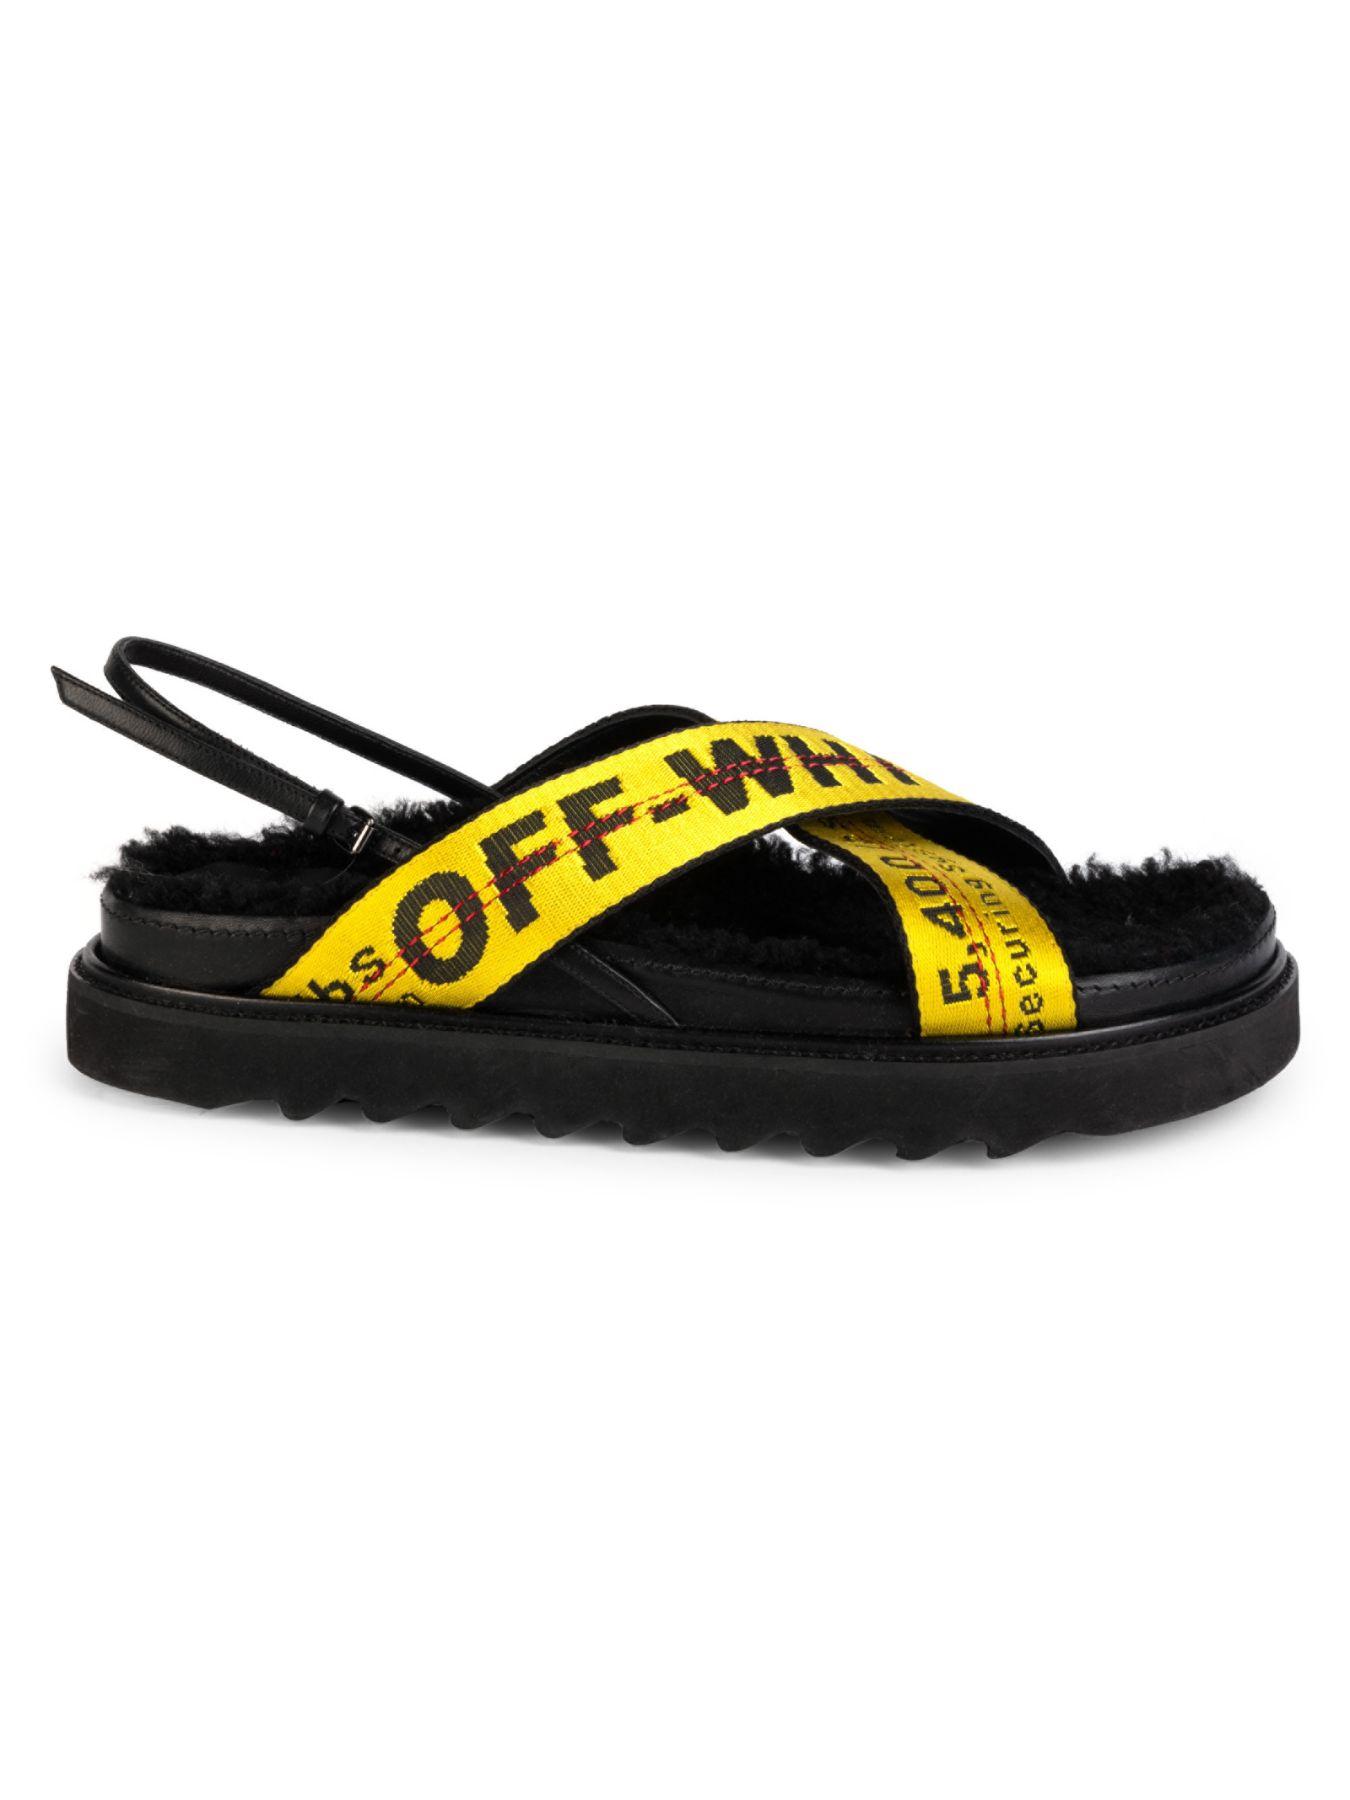 Off-White c/o Virgil Abloh Industrial Belt Shearling-lined Sandals in Black Yellow (Black ...